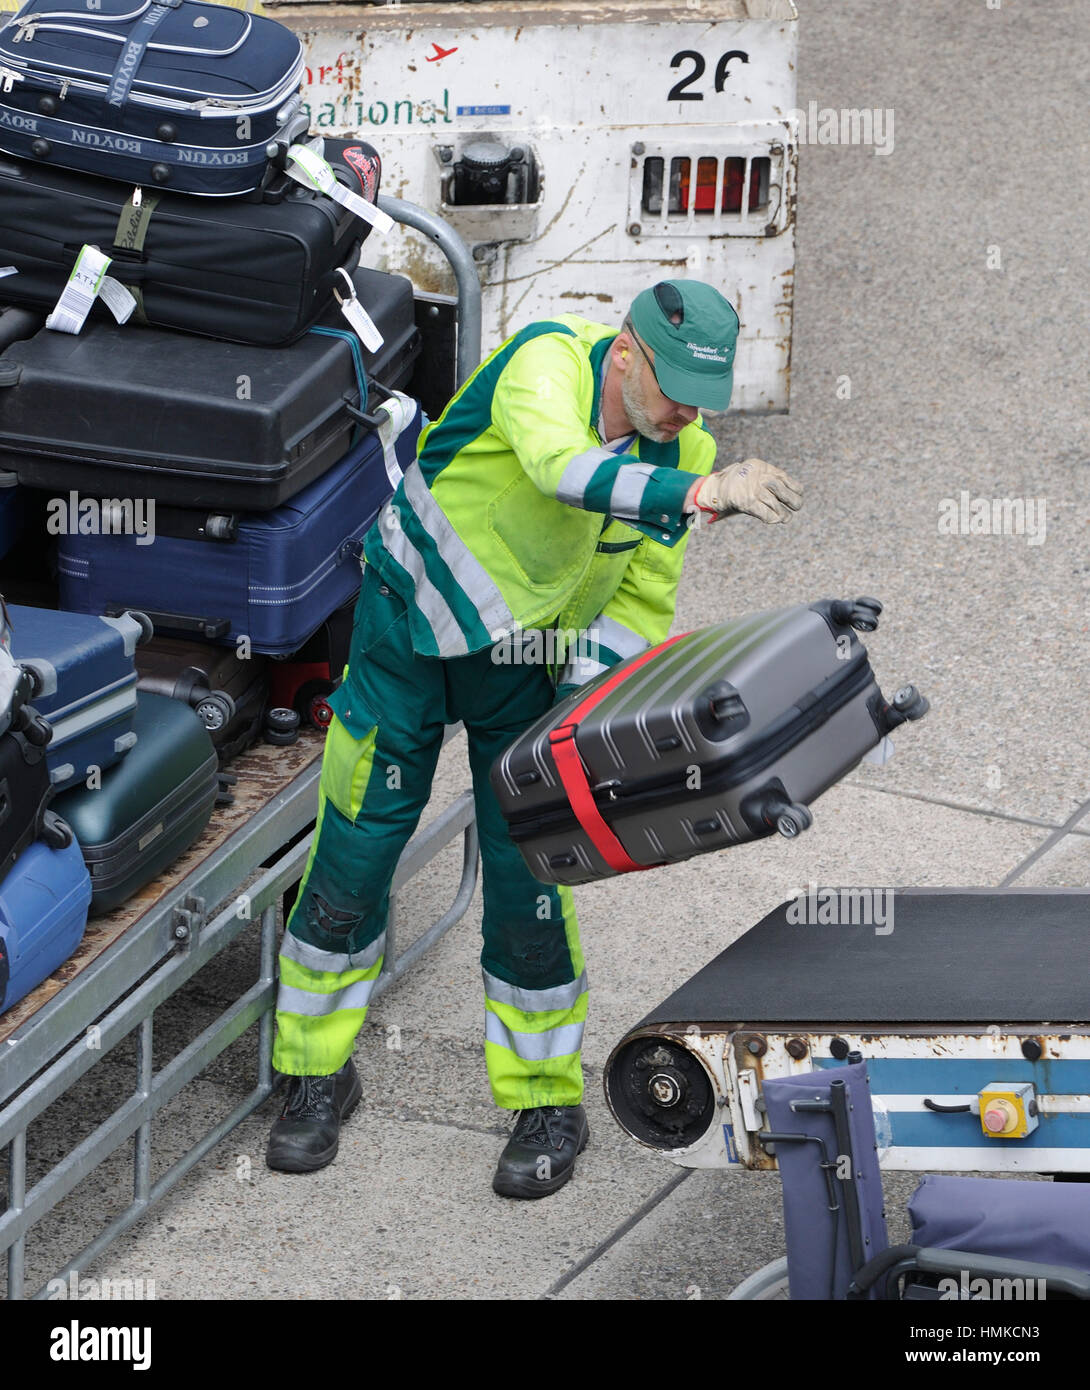 man wearing yellow high-viz jacket loading bags from a trolley onto a baggage-belt truck Stock Photo